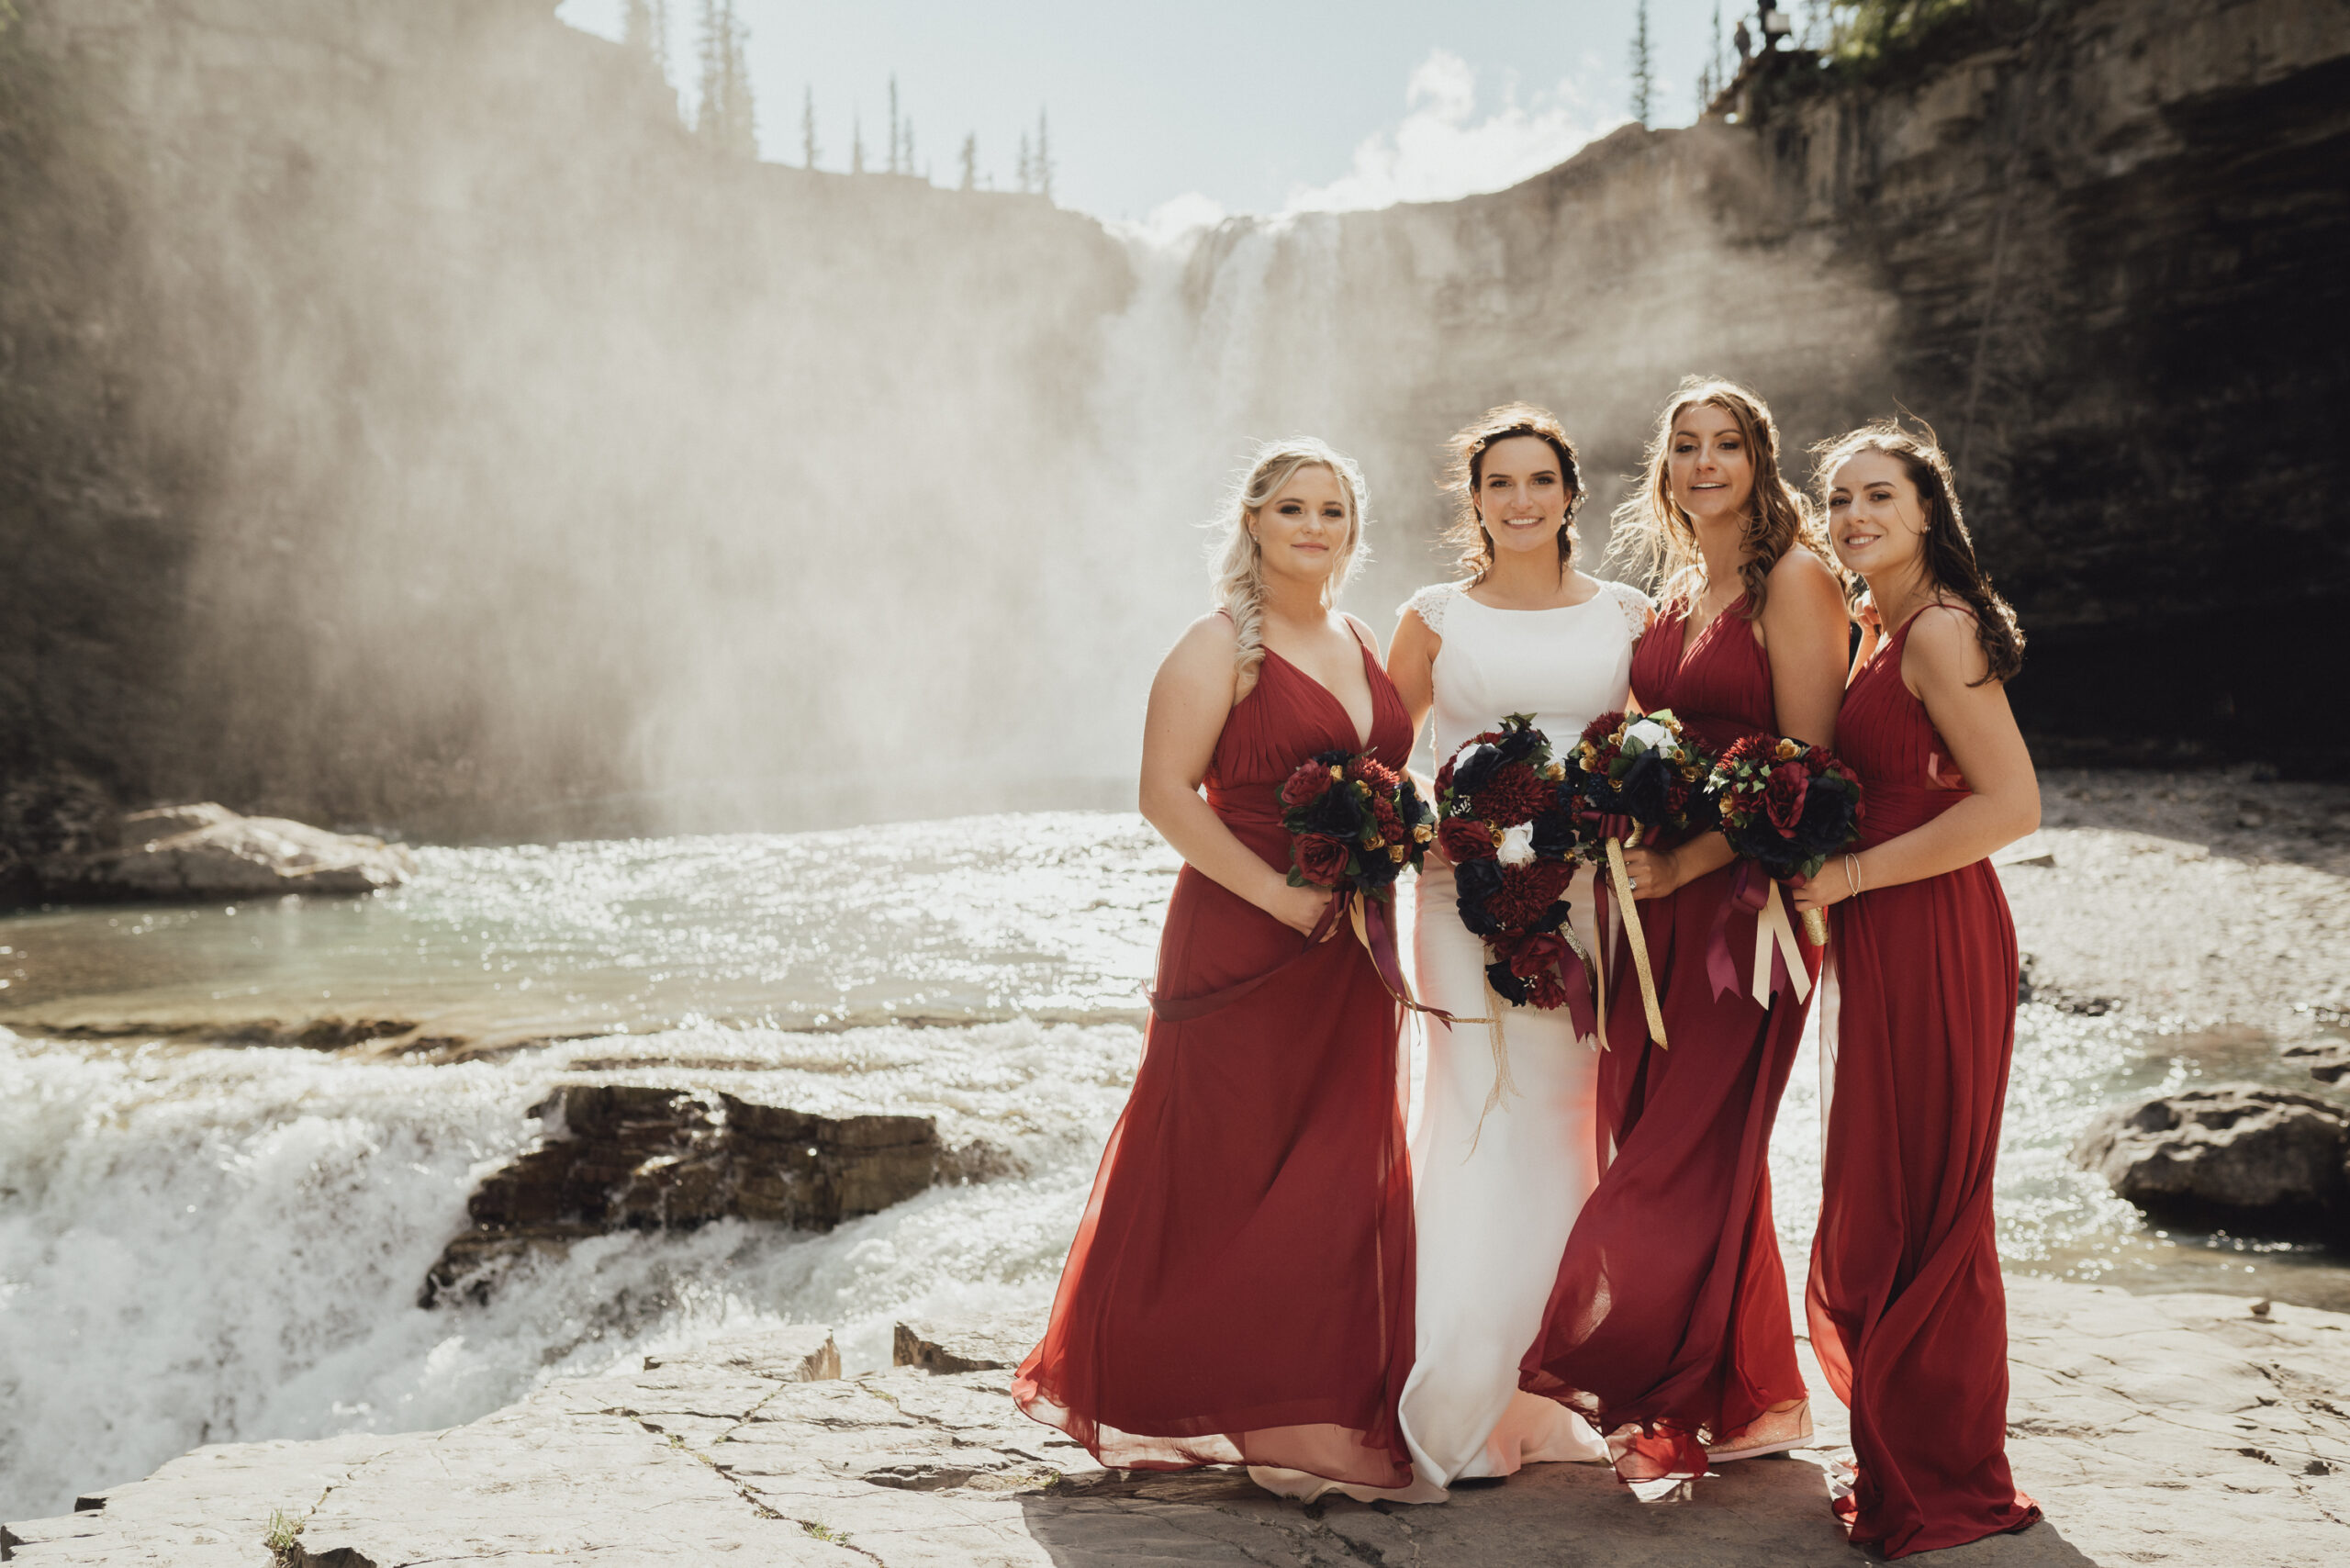 Bride in classic wedding gown with bridesmaids in red bridesmaids gowns standing in front of waterfall